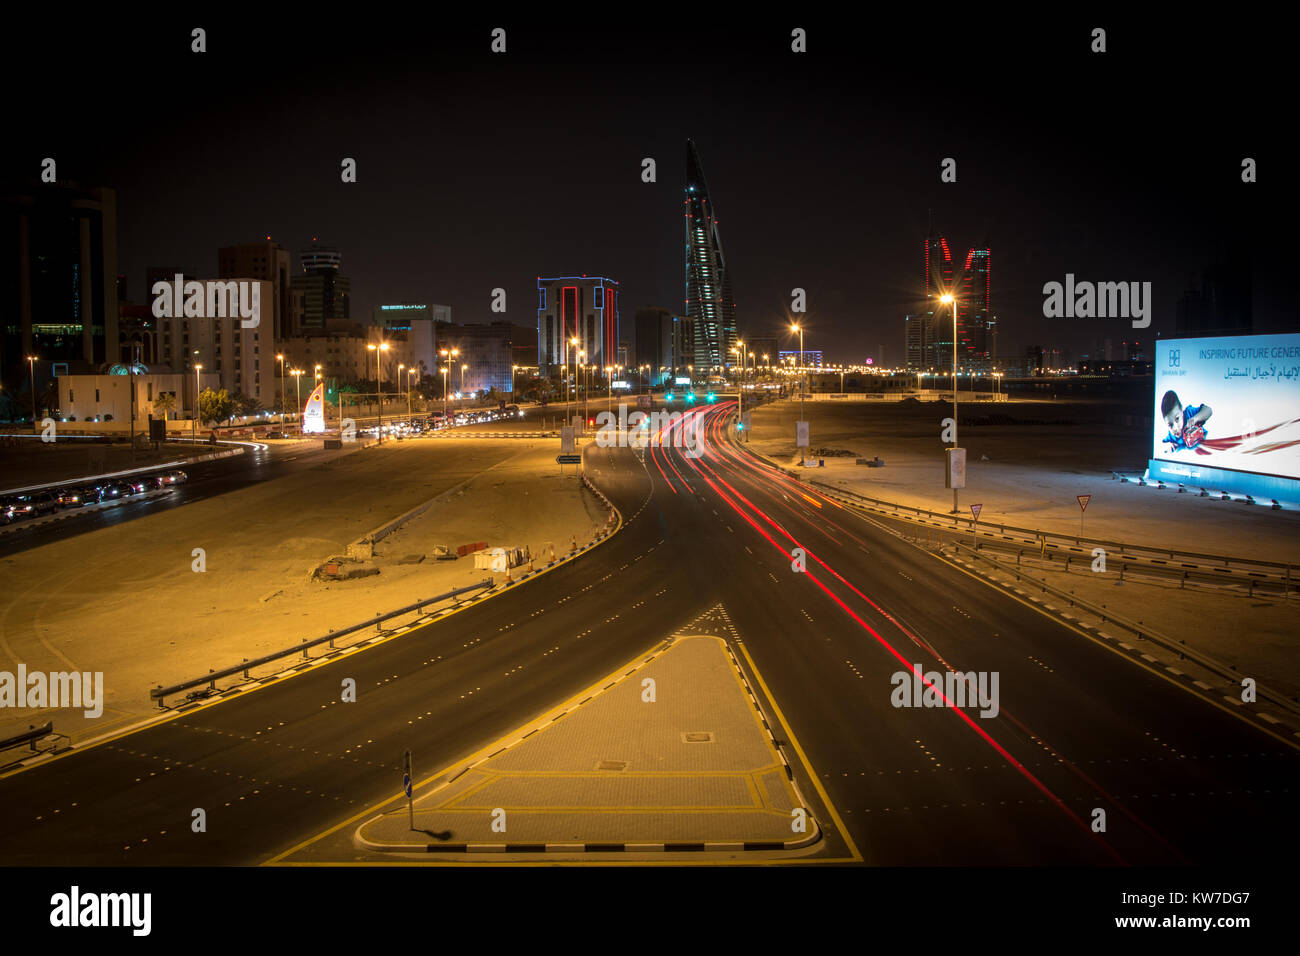 King Faisal Highway view from the Diplomatic Area Stock Photo